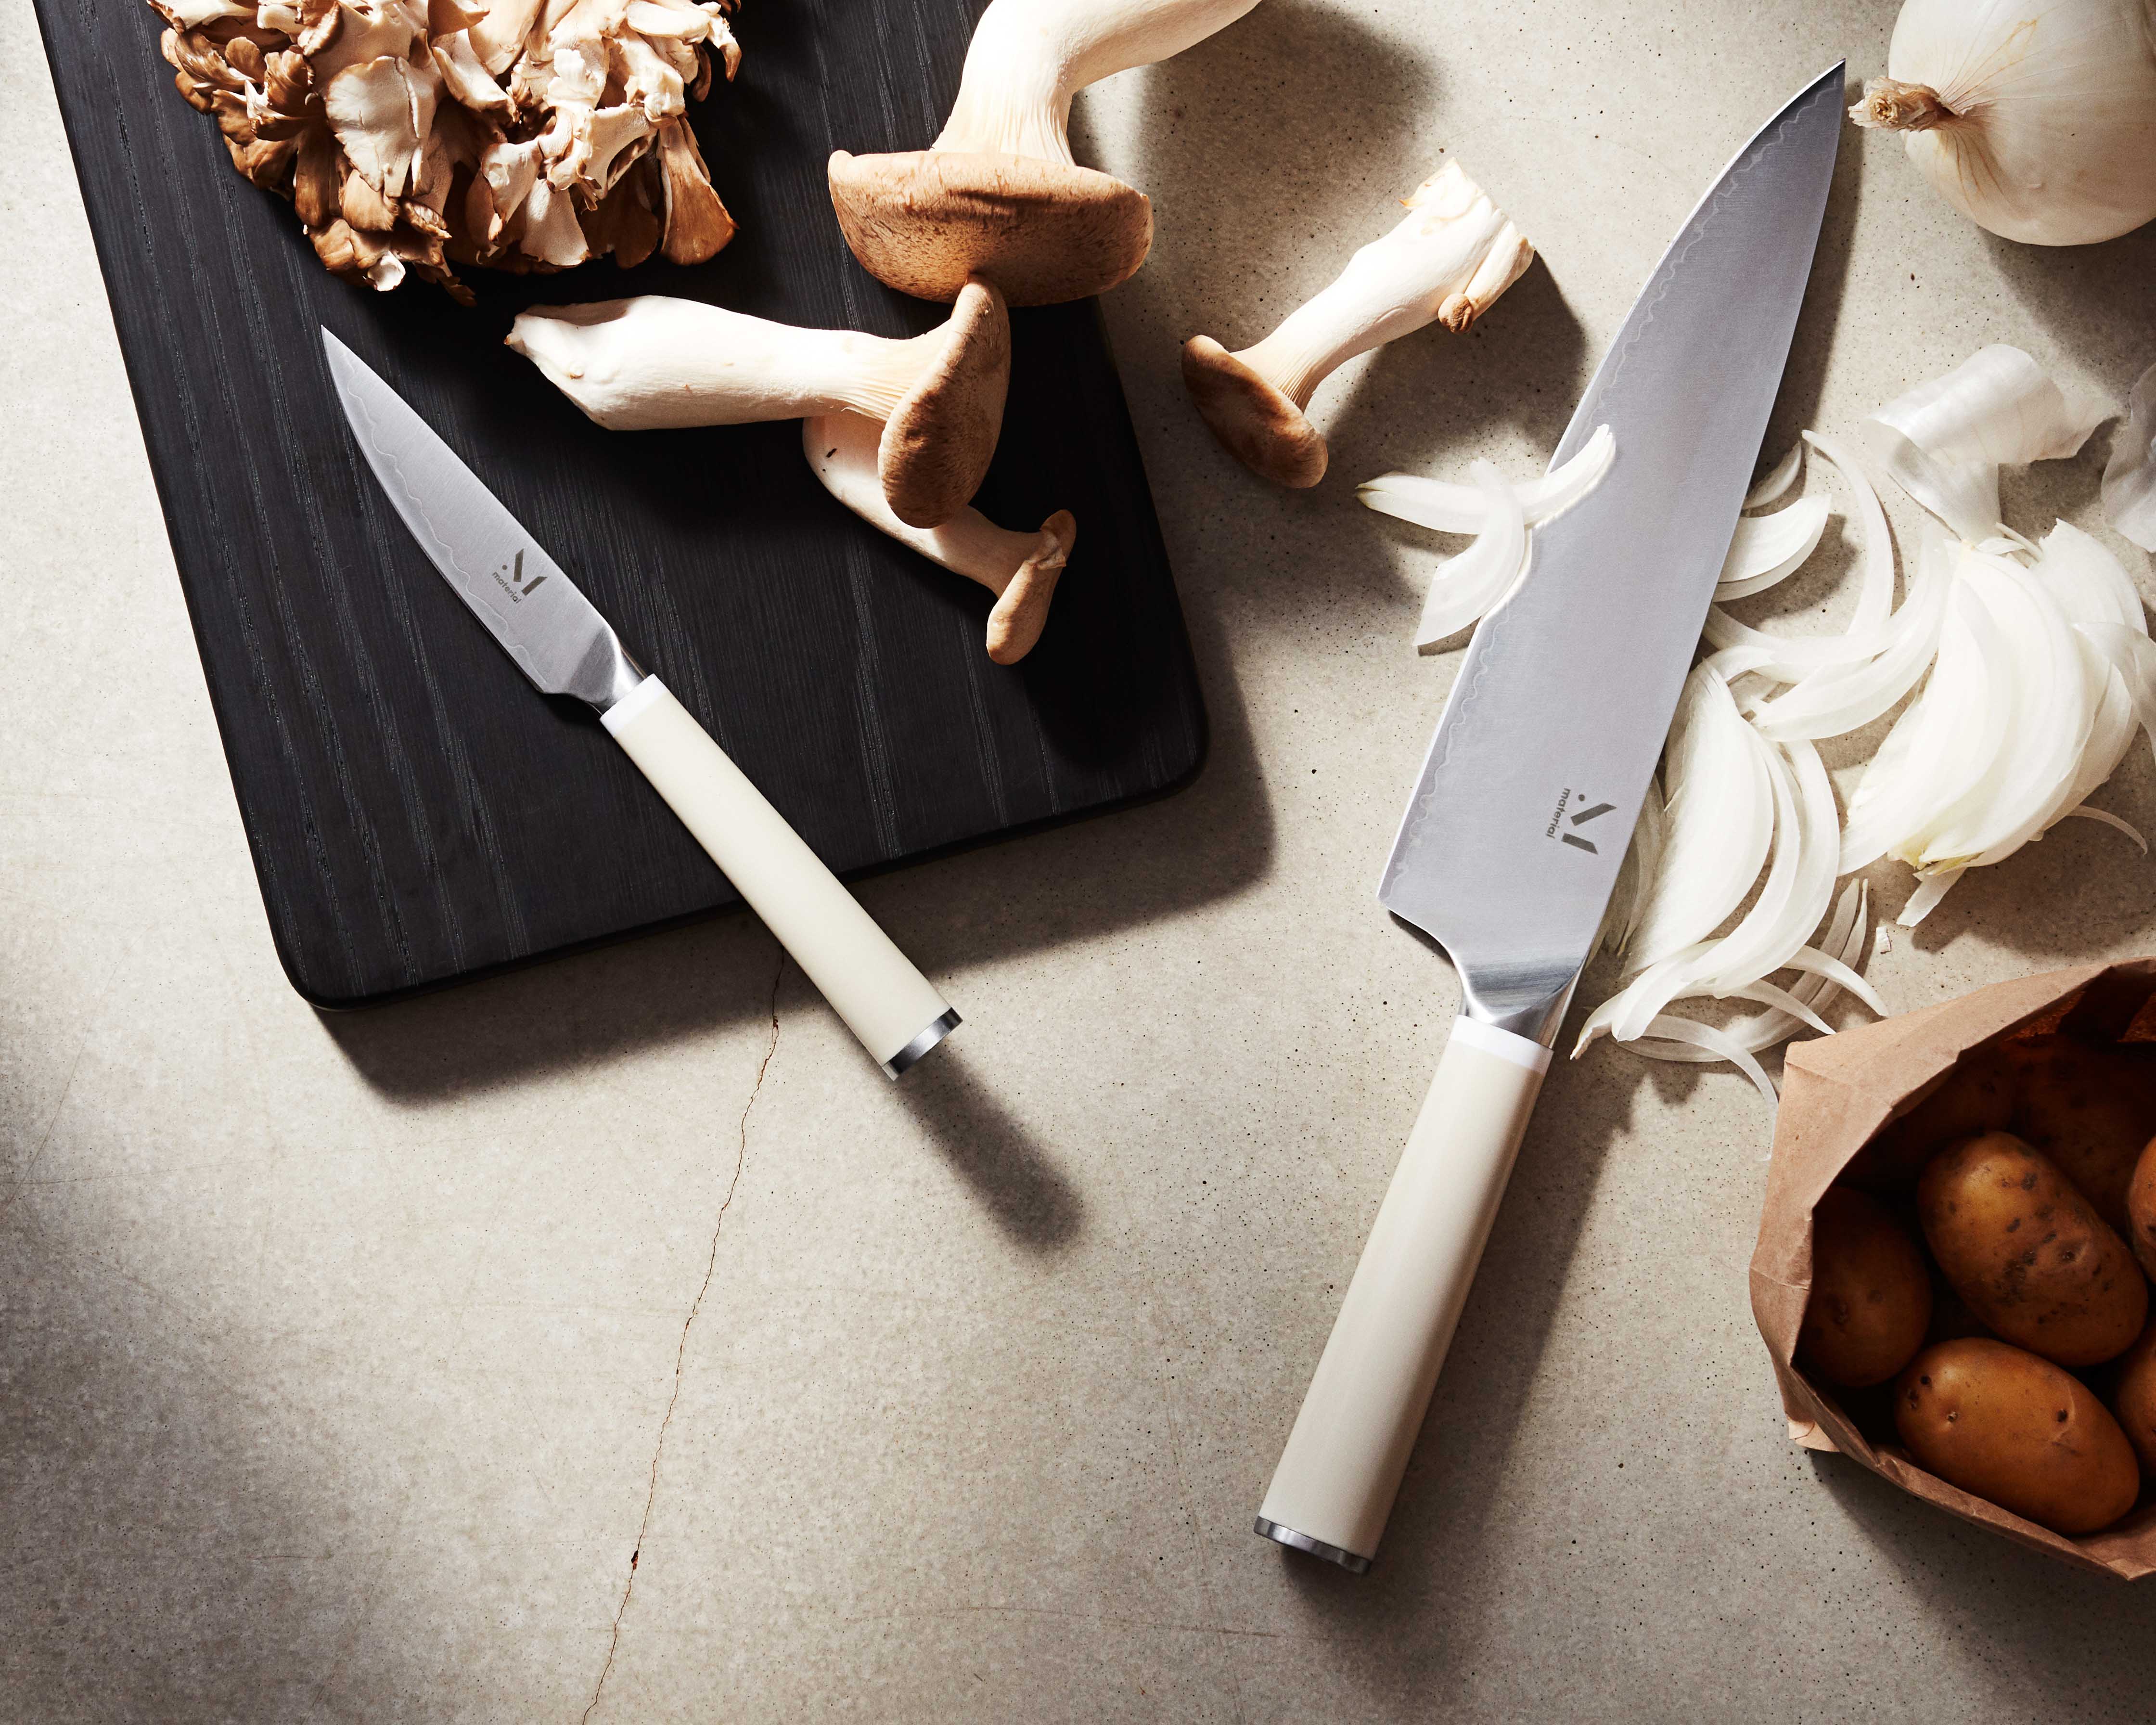 The Knives: Thoughtfully Designed, Affordably Priced